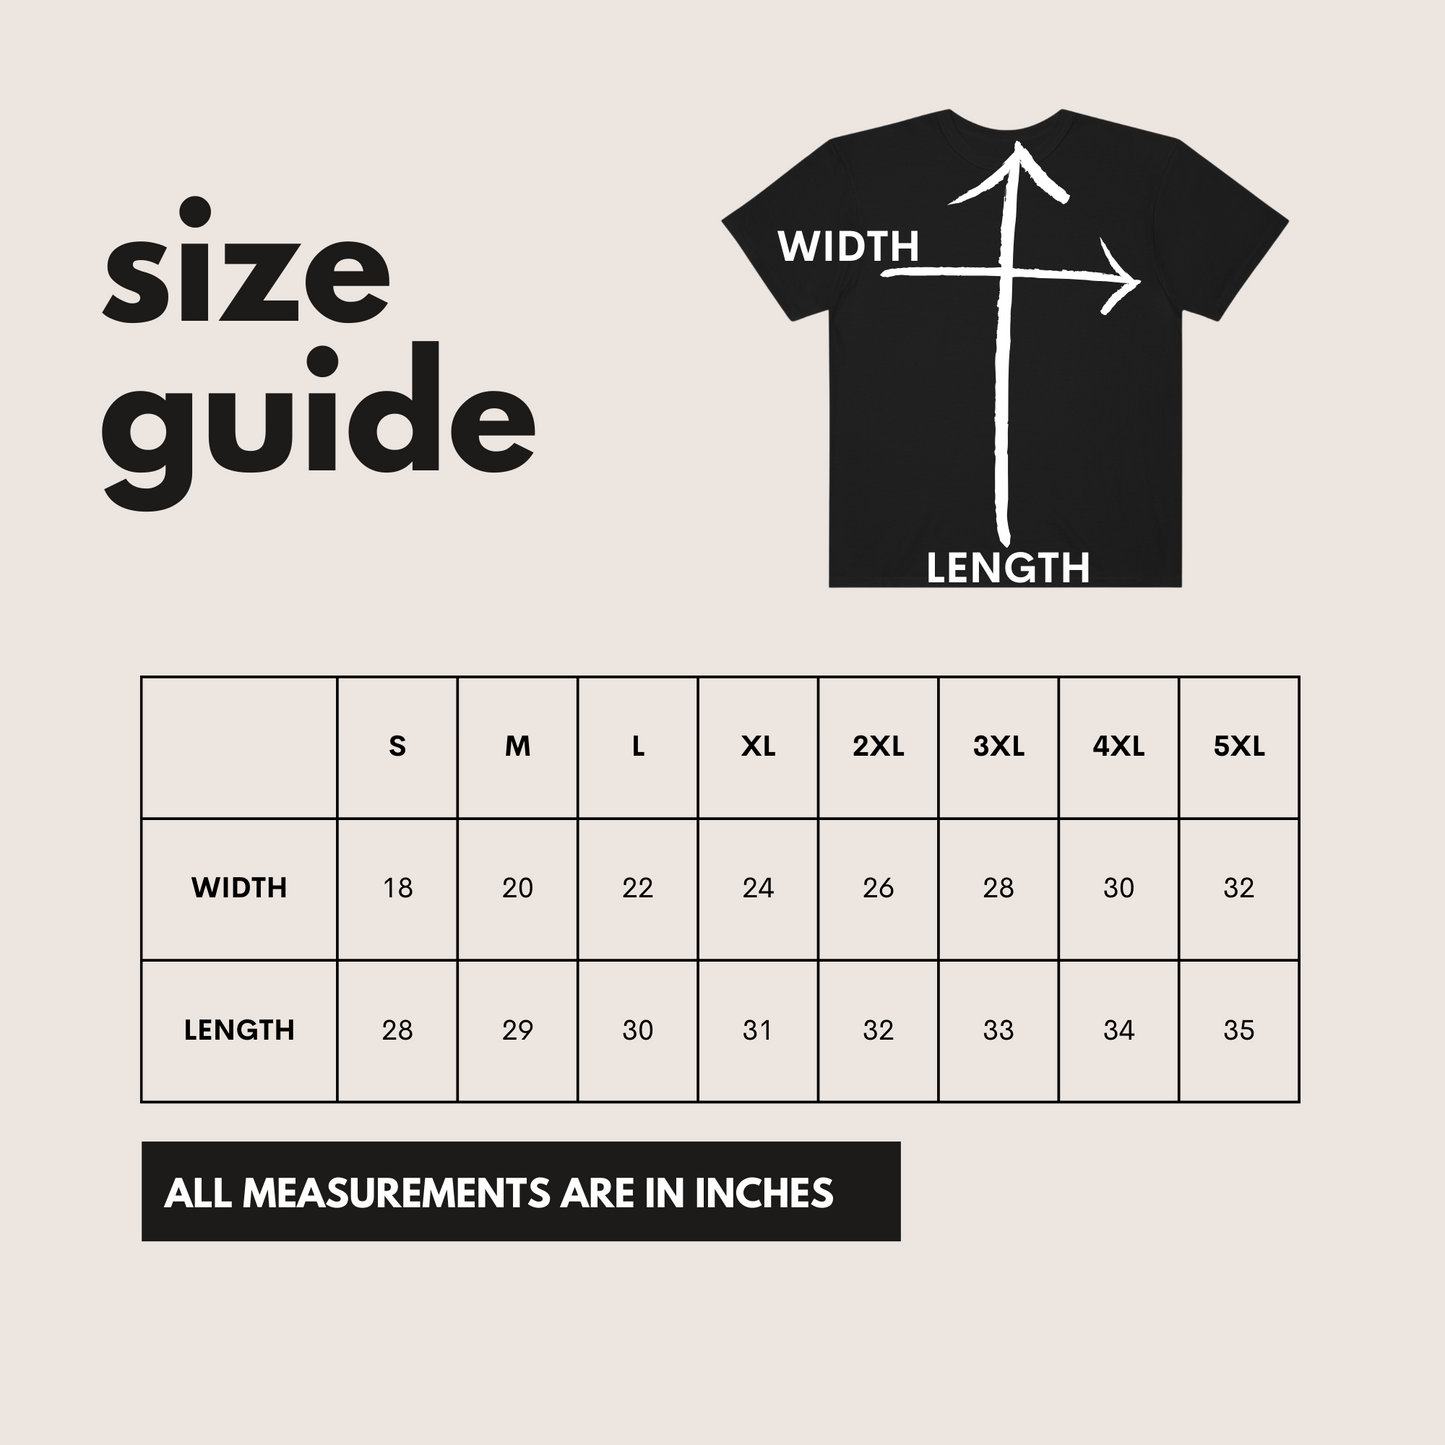 a size guide for a t - shirt with measurements